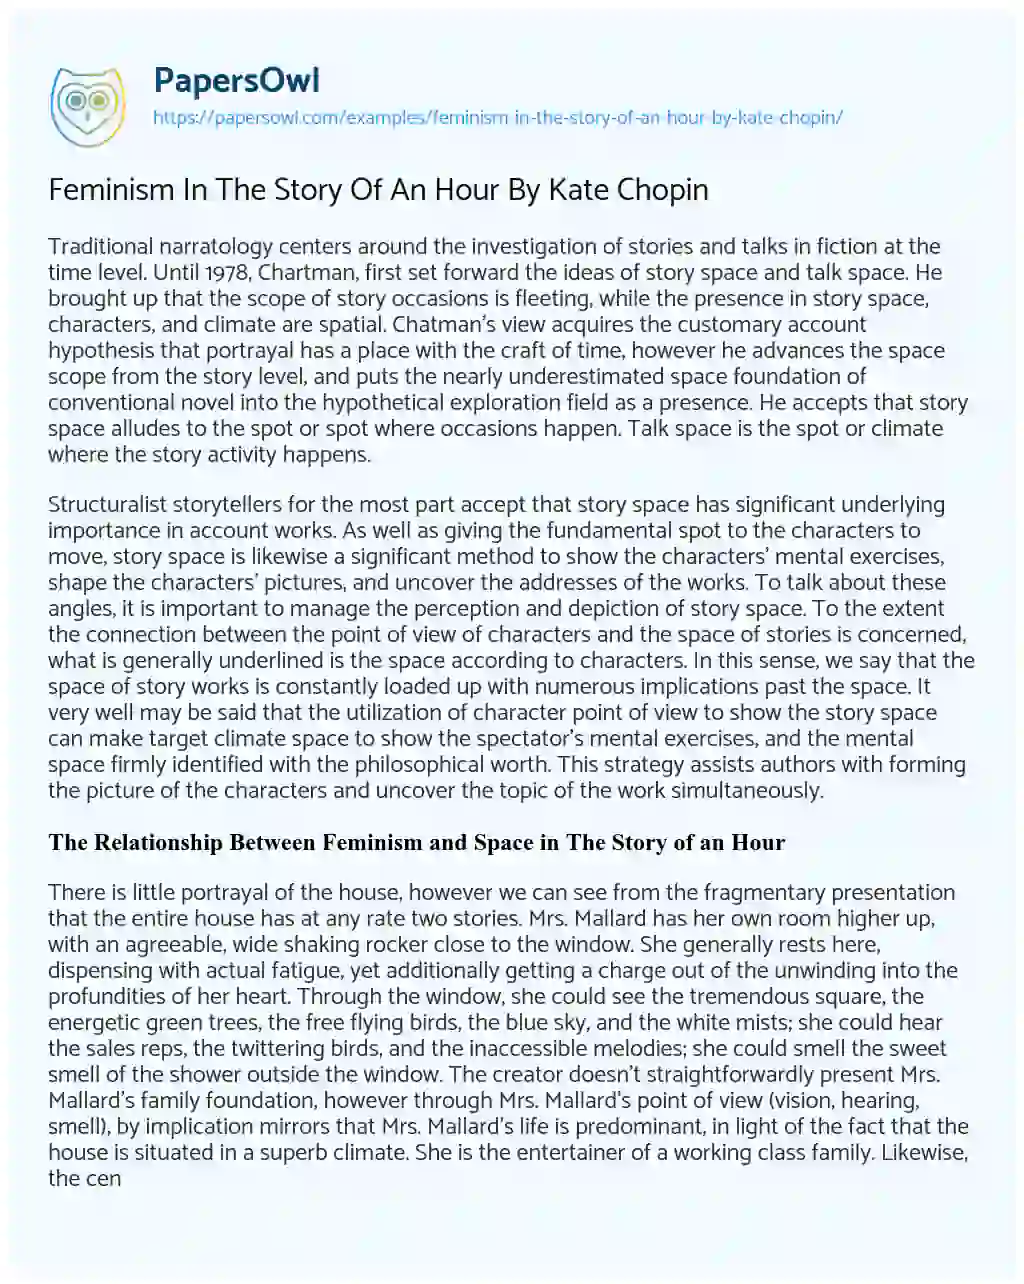 Essay on Feminism in the Story of an Hour by Kate Chopin